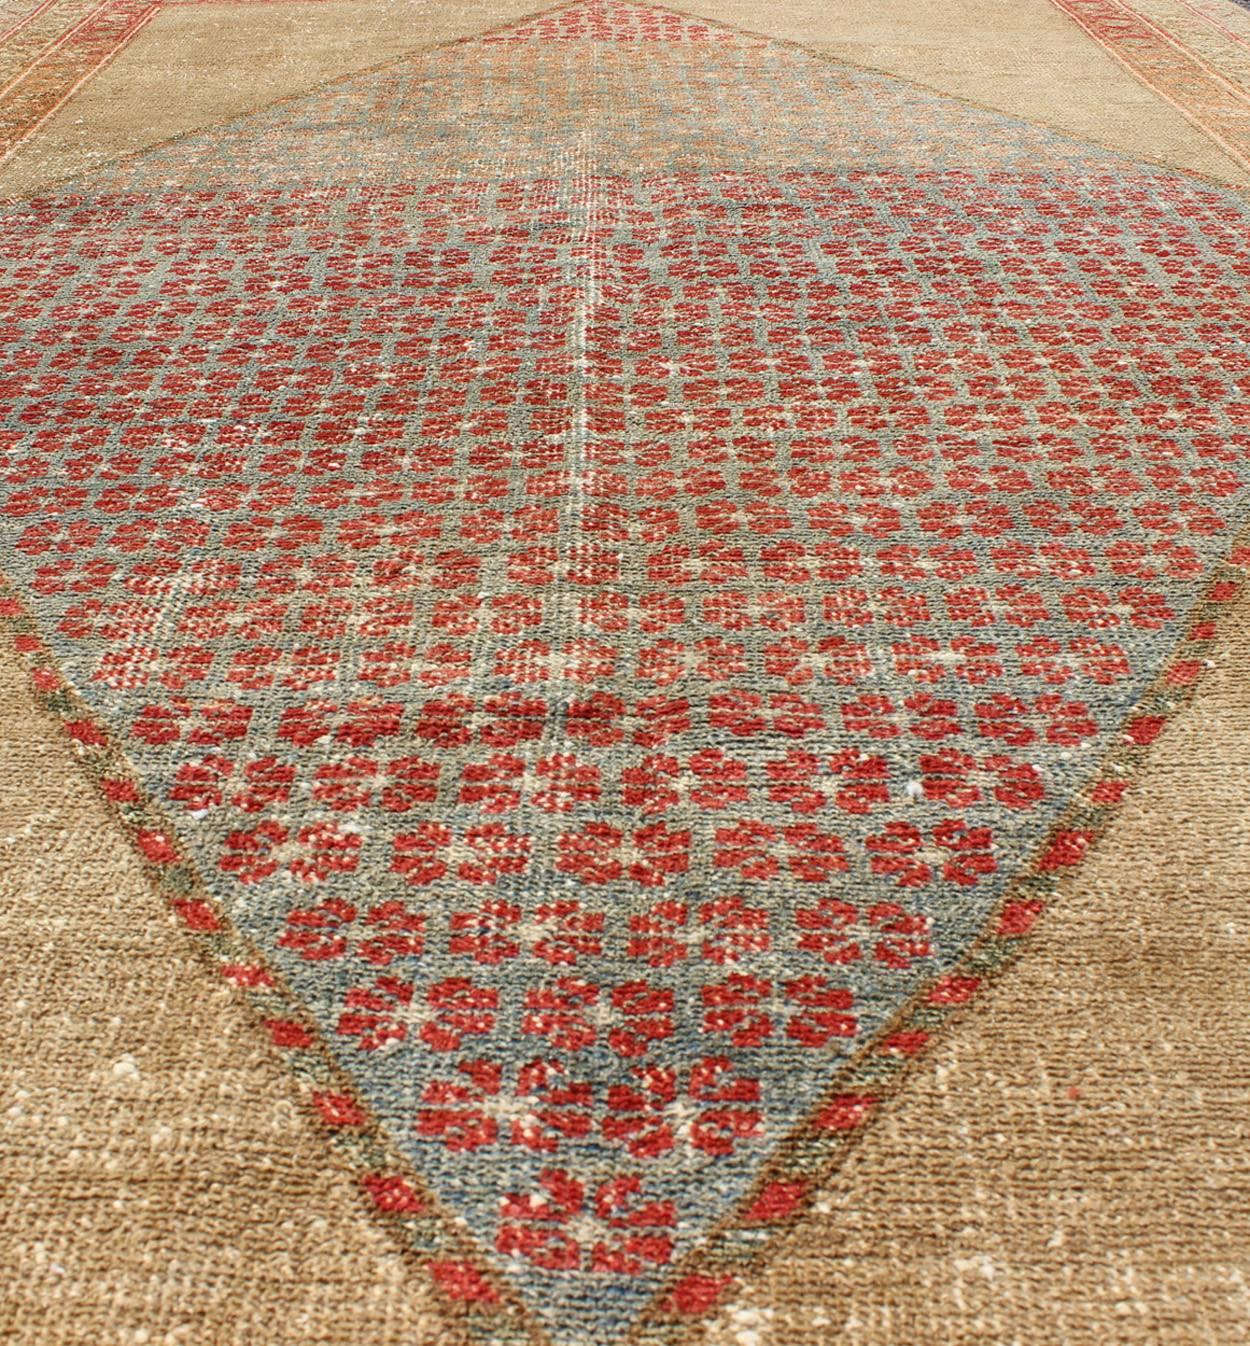 Diamond Medallion Antique Serab Persian Rug with Floral Borders In Good Condition For Sale In Atlanta, GA